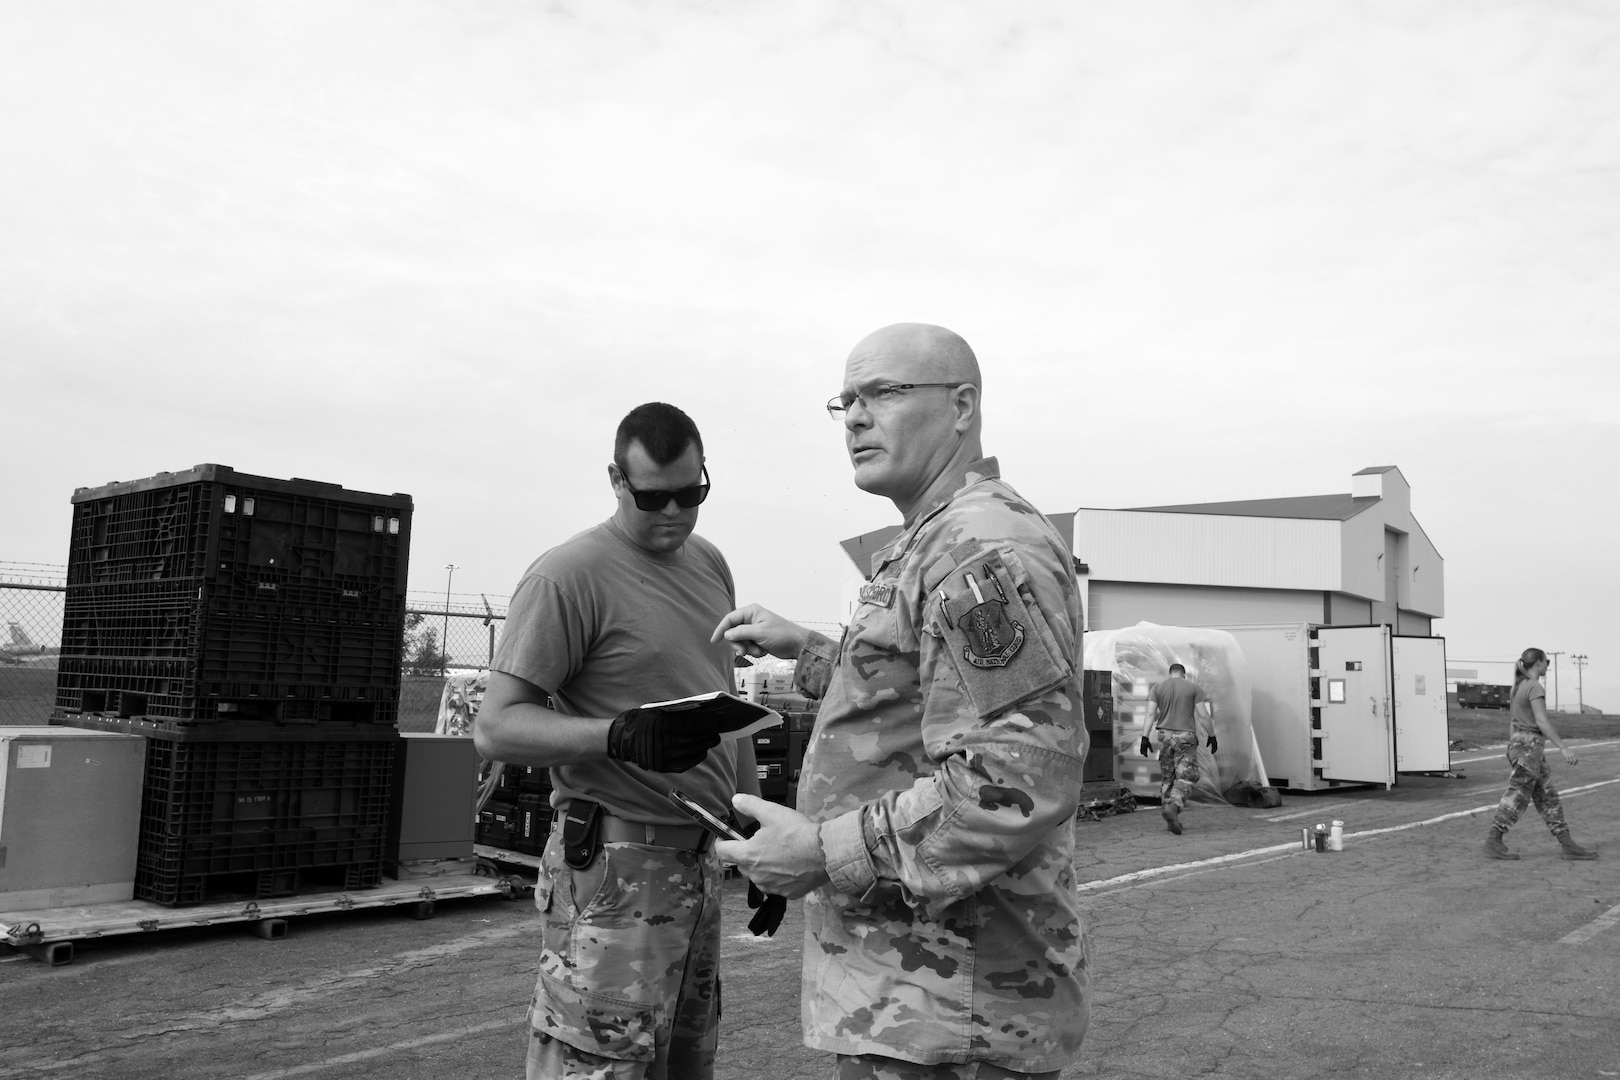 Capt. Michael Wollenzien, a deployment commander with the Florida Air National Guard’s 114th Electromagnetic Warfare Squadron, provides guidance to an Airman during Exercise ThunderMoose, June 13, 2023, at Bangor Air National Guard Base in Maine. The exercise involved transporting an electromagnetic warfare system to the base and setting up an operating facility.